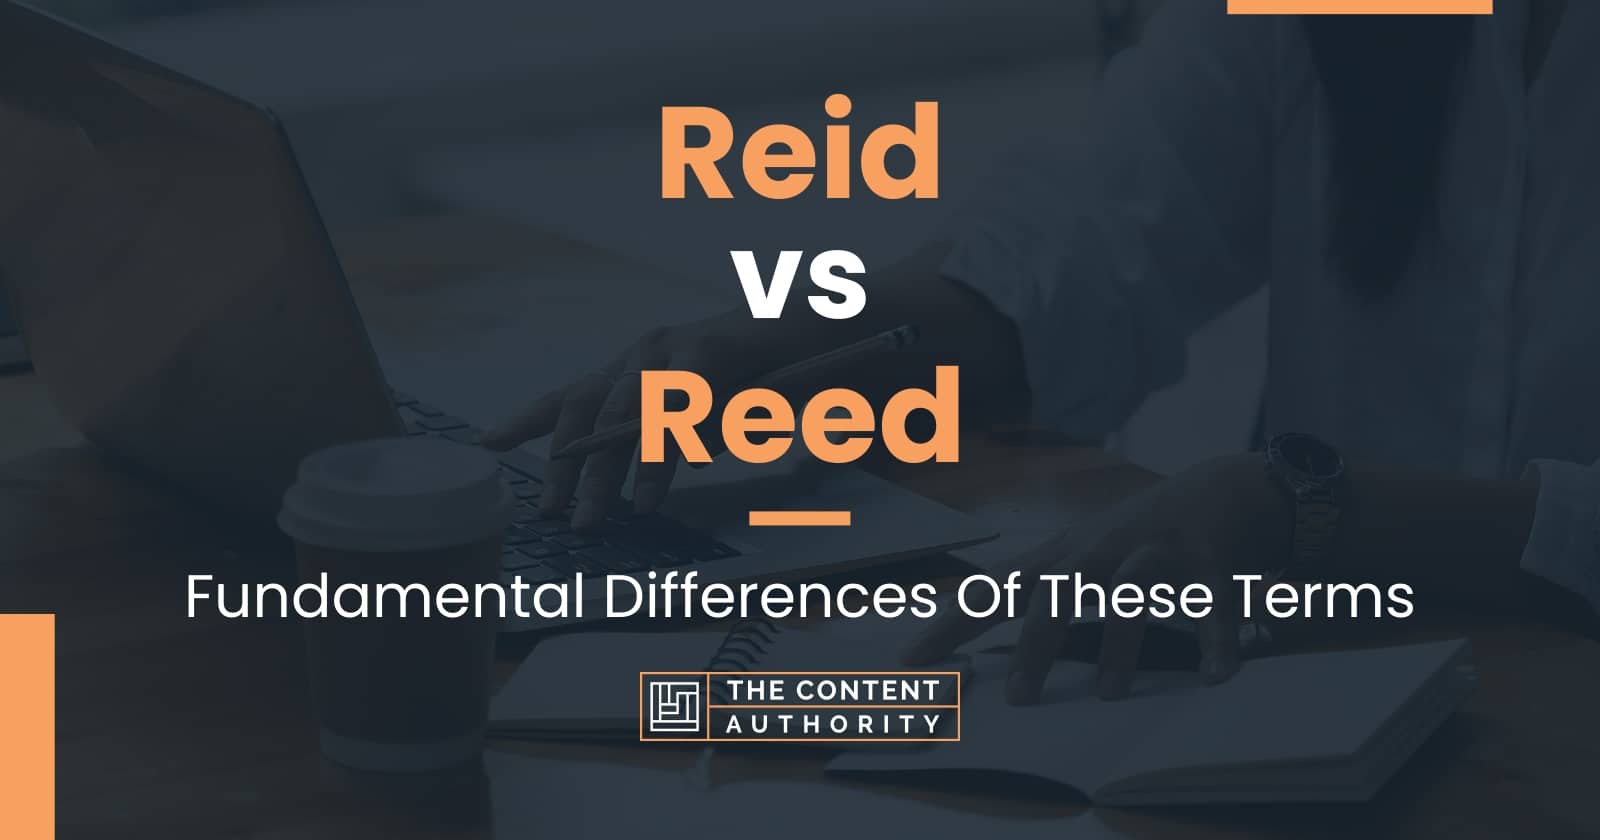 Reid vs Reed: Fundamental Differences Of These Terms